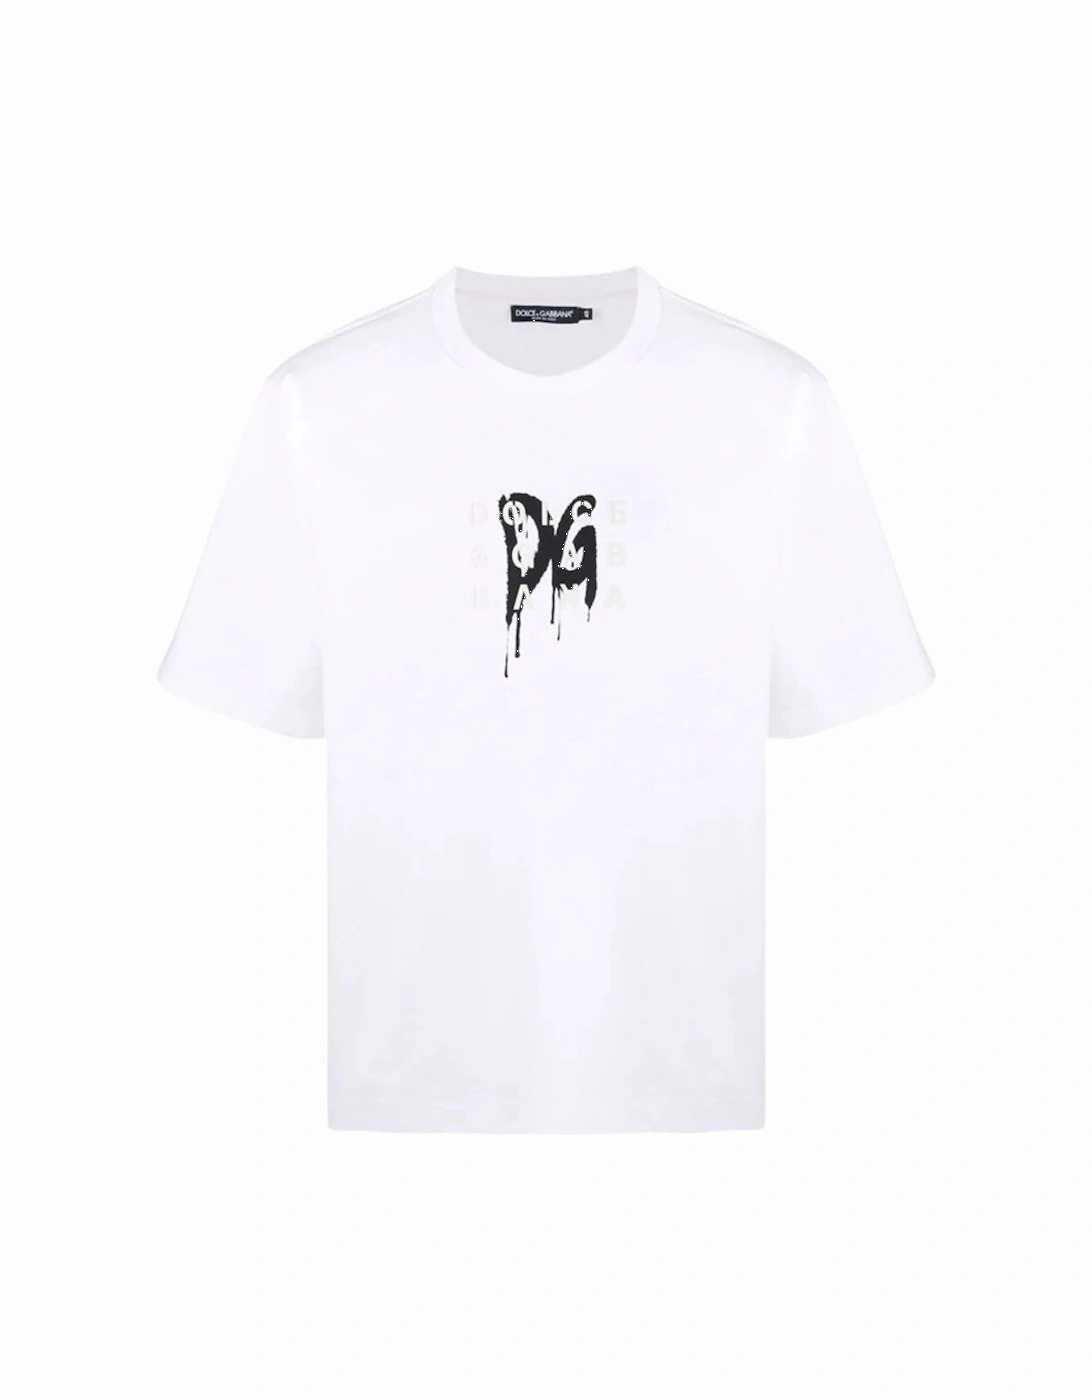 Graffiti Logo Print with Rubber effect T-Shirt in White, 6 of 5